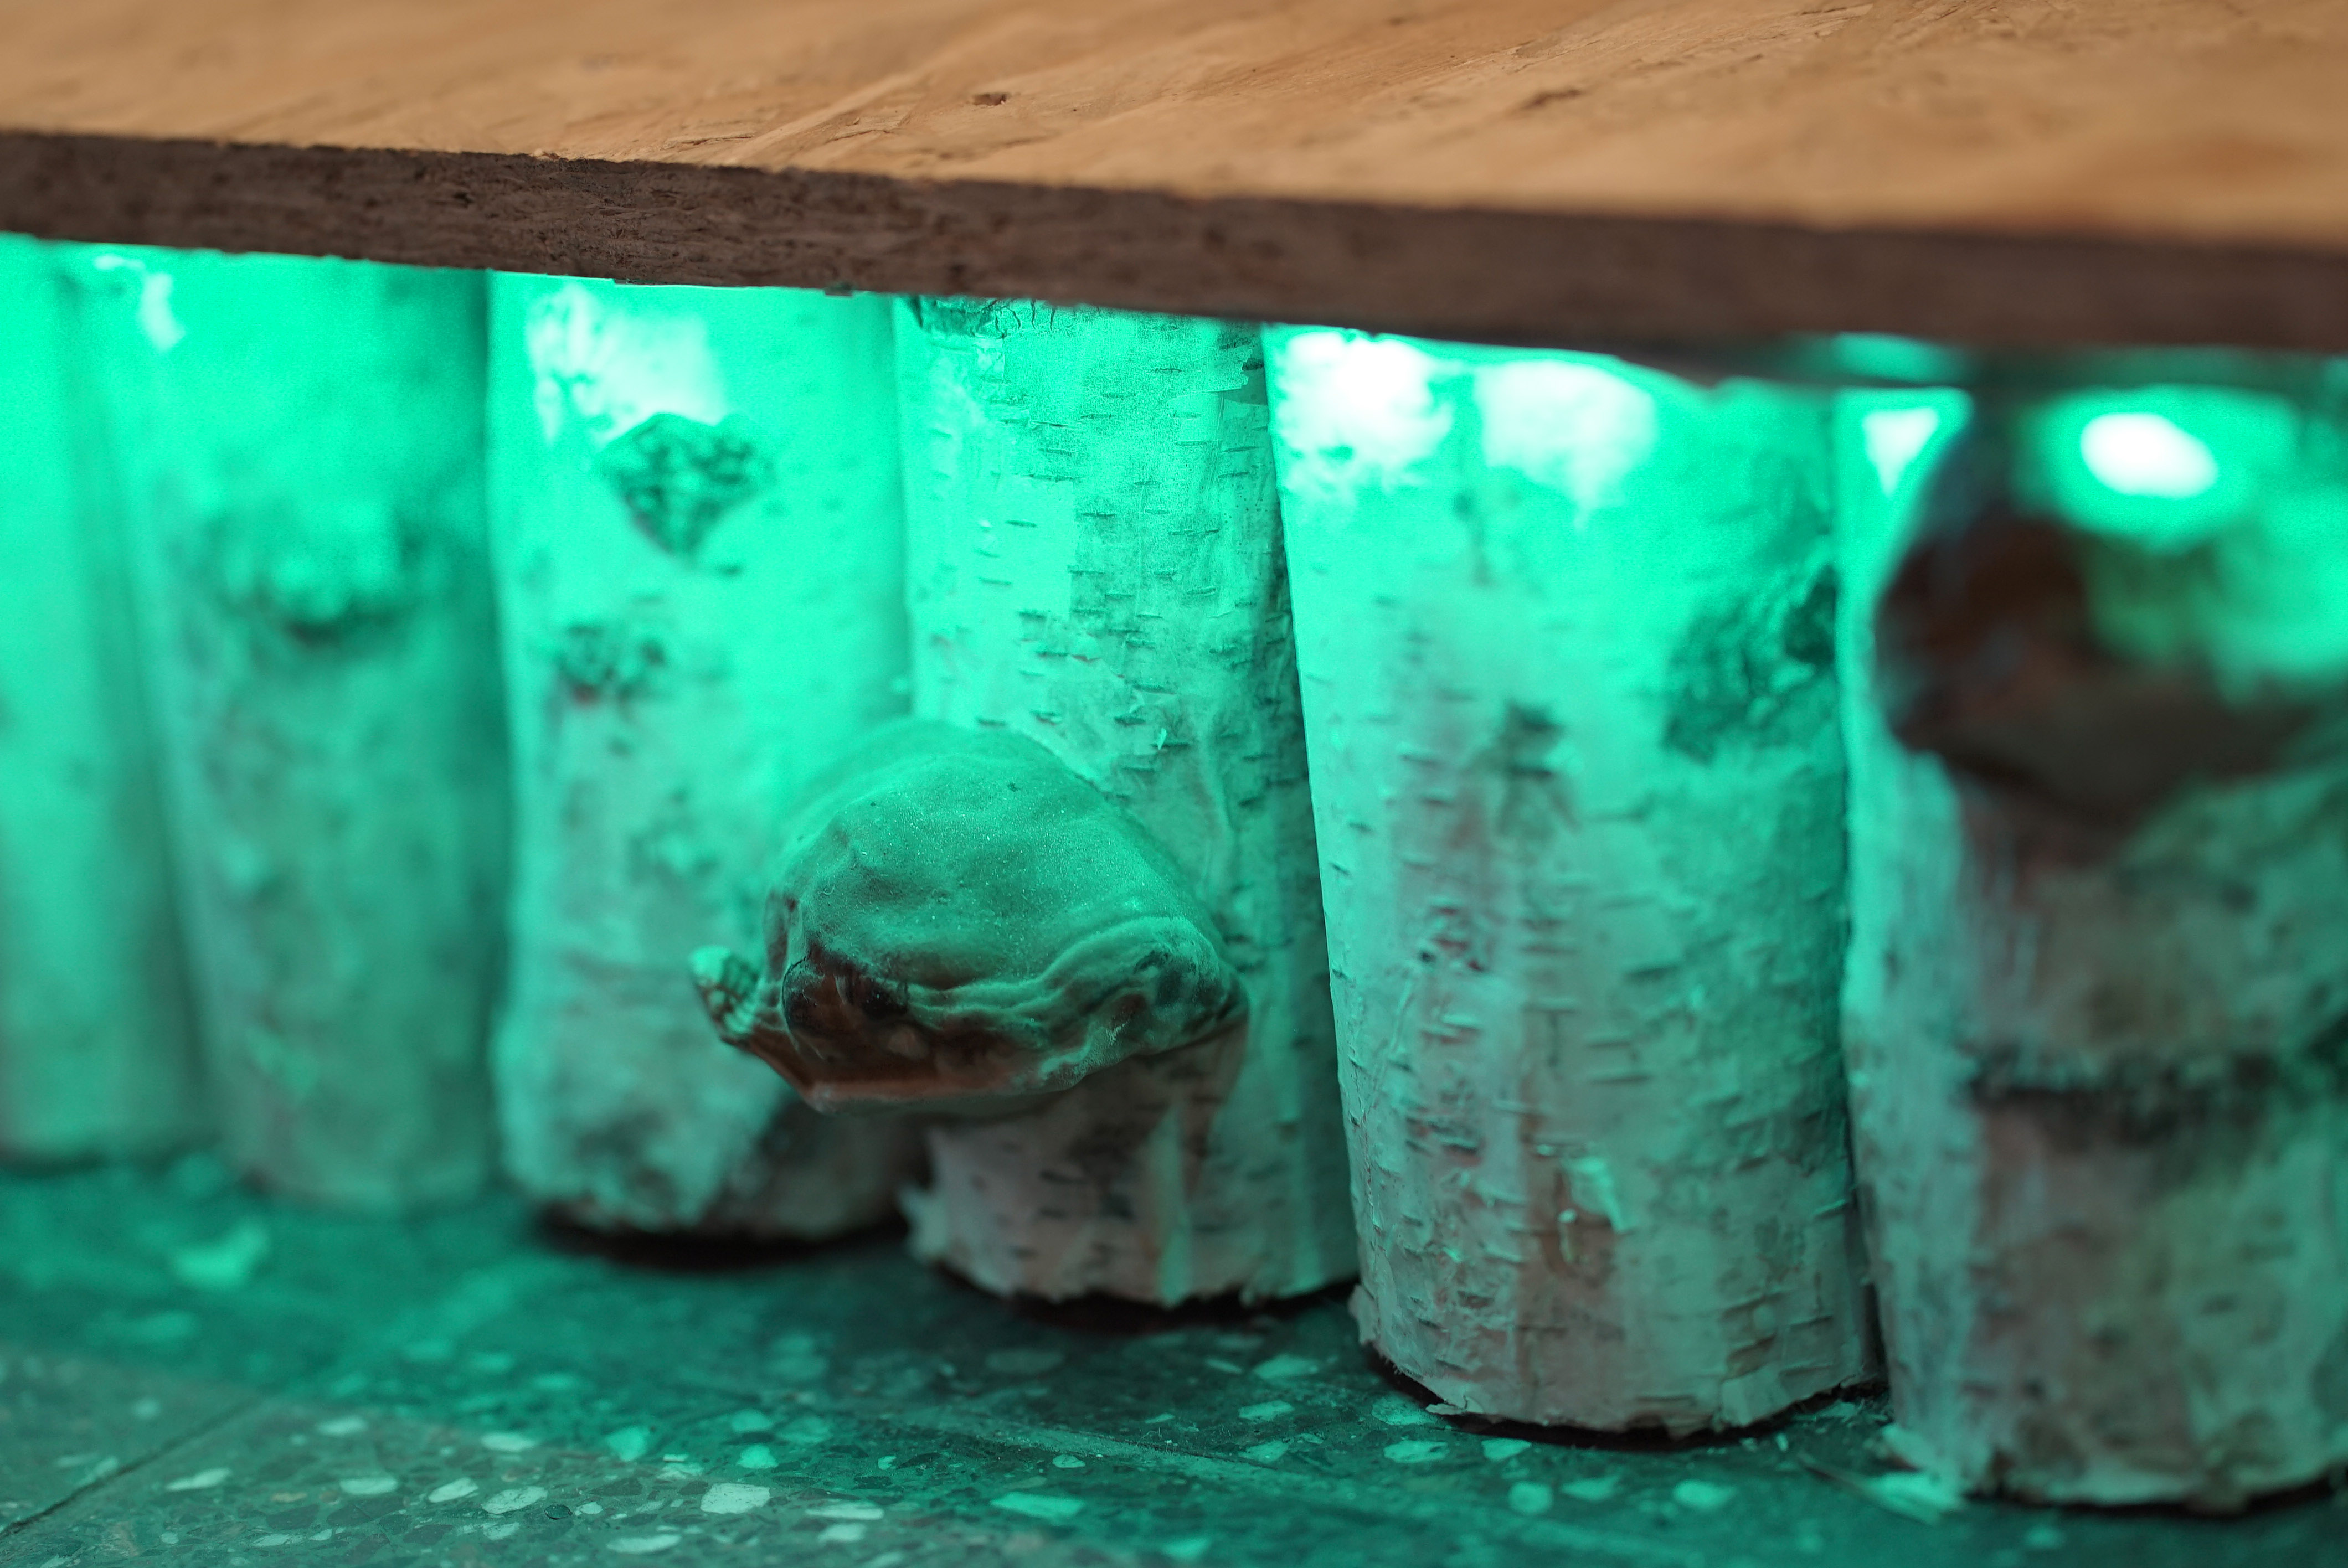 The photo is a macro shot of a row of birch pieces standing next to each other. Above them is the edge of a chipboard. The pieces are part of the lower frame of a stage. On two birch pieces live large dried tree fungi. The birch pieces and the mushroom are illuminated from above by a turquoise light.